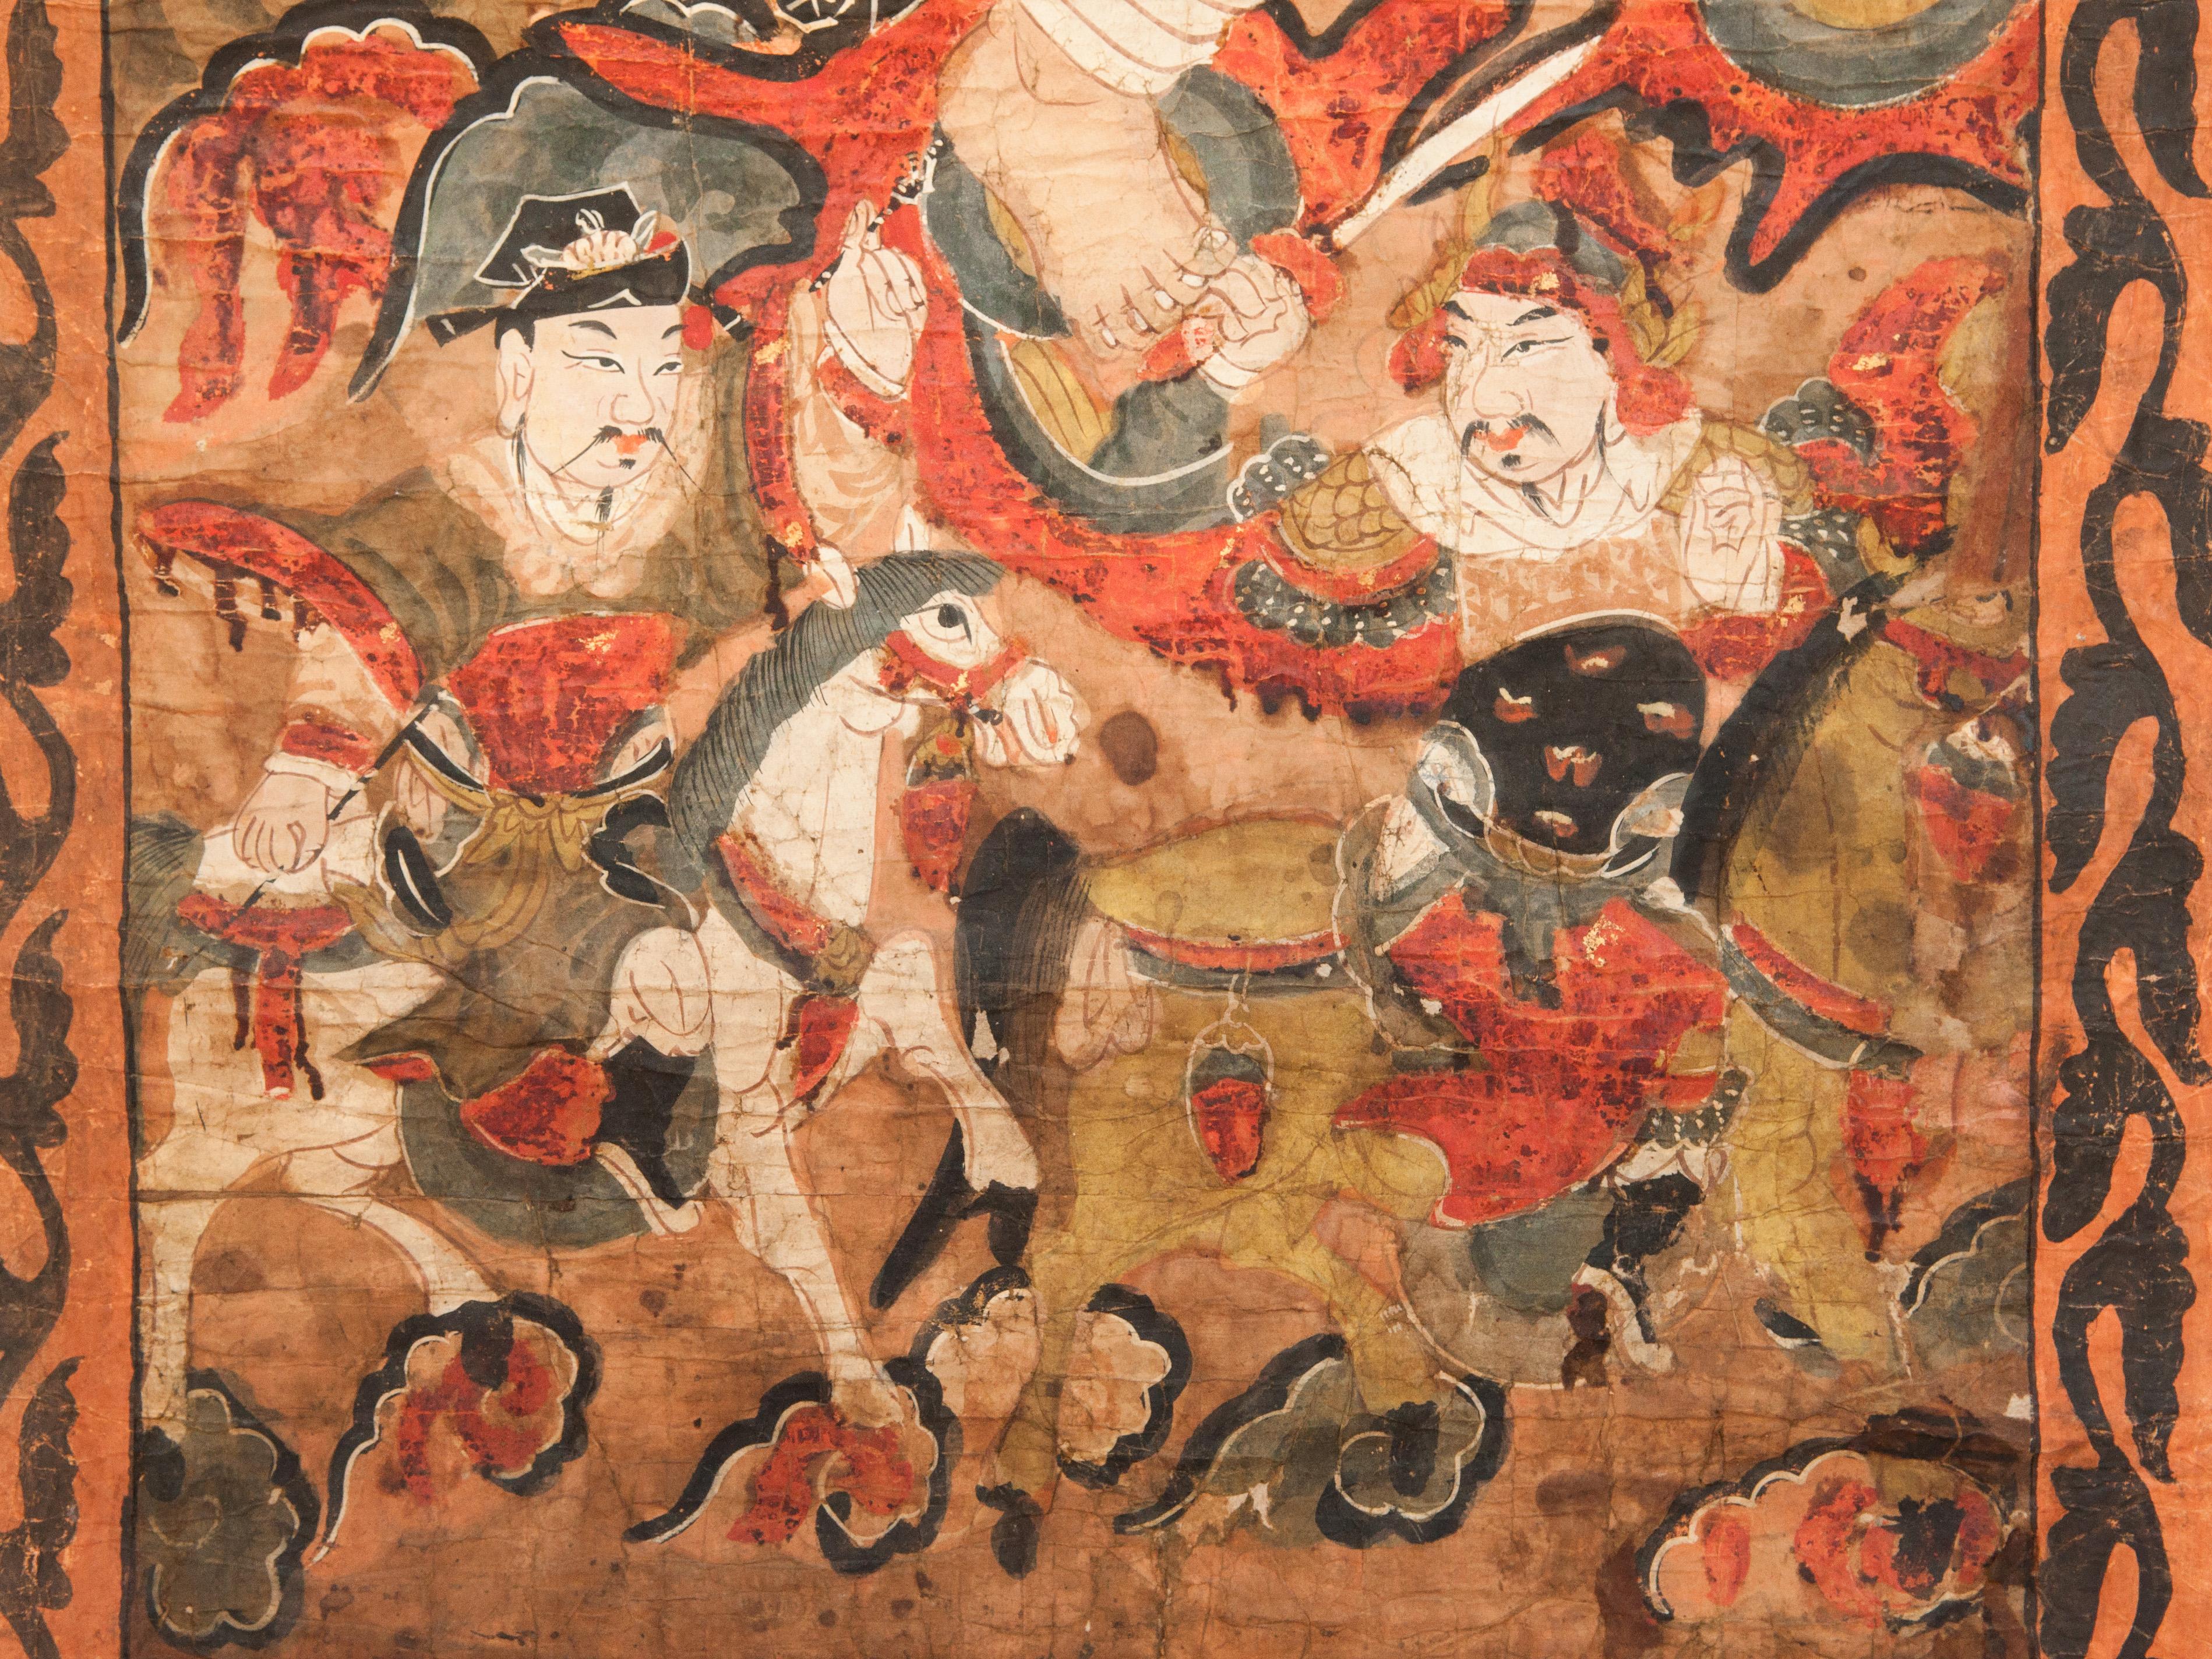 Chinese Yao Ceremonial Painting, Guizhou Province, China, Early to Mid-19th Century